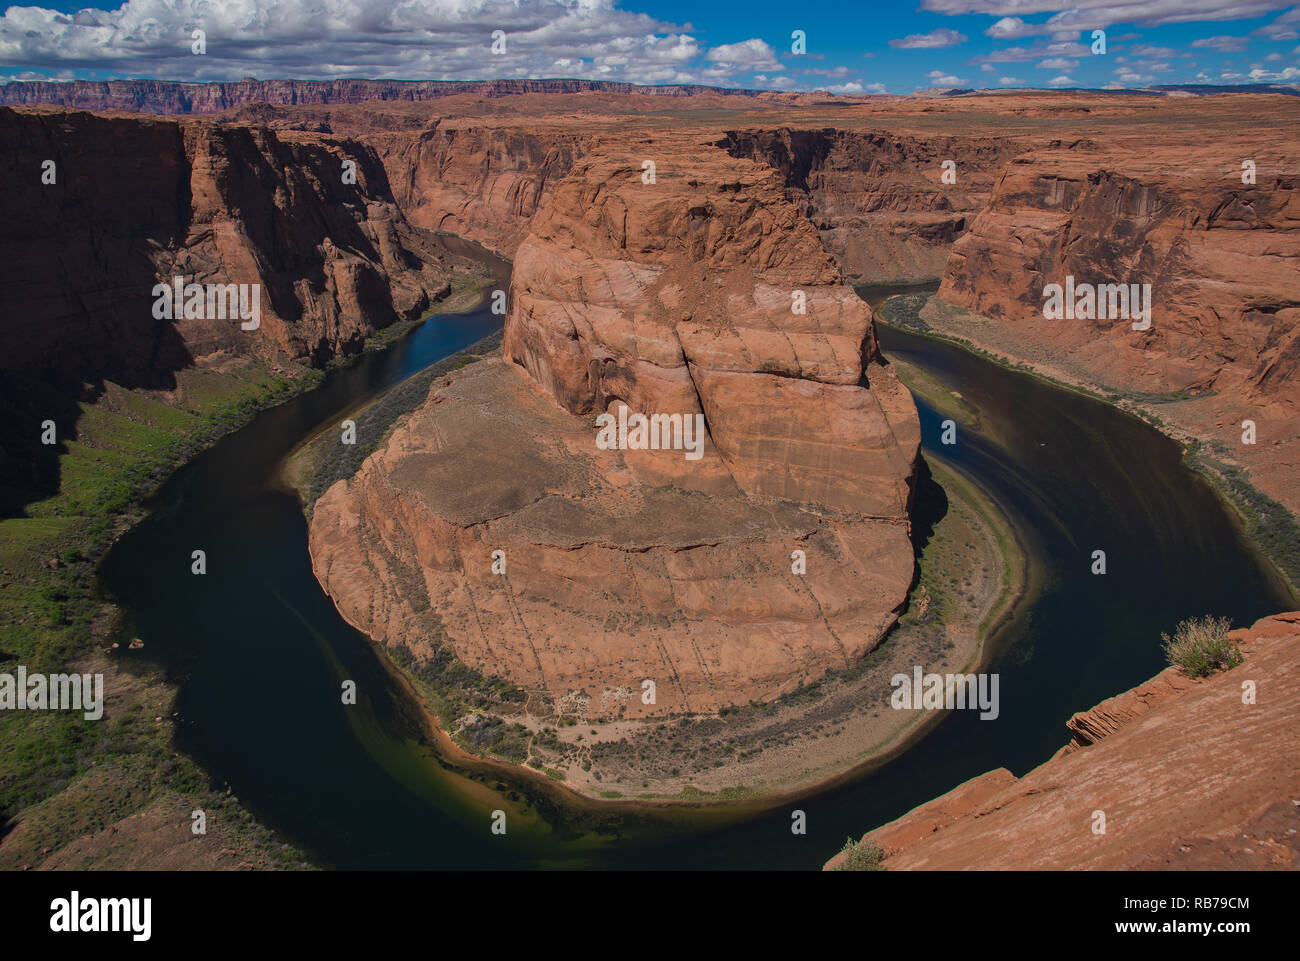 The Famous Horseshoe bend near Grand Canyon and Antelope Canyon in ...